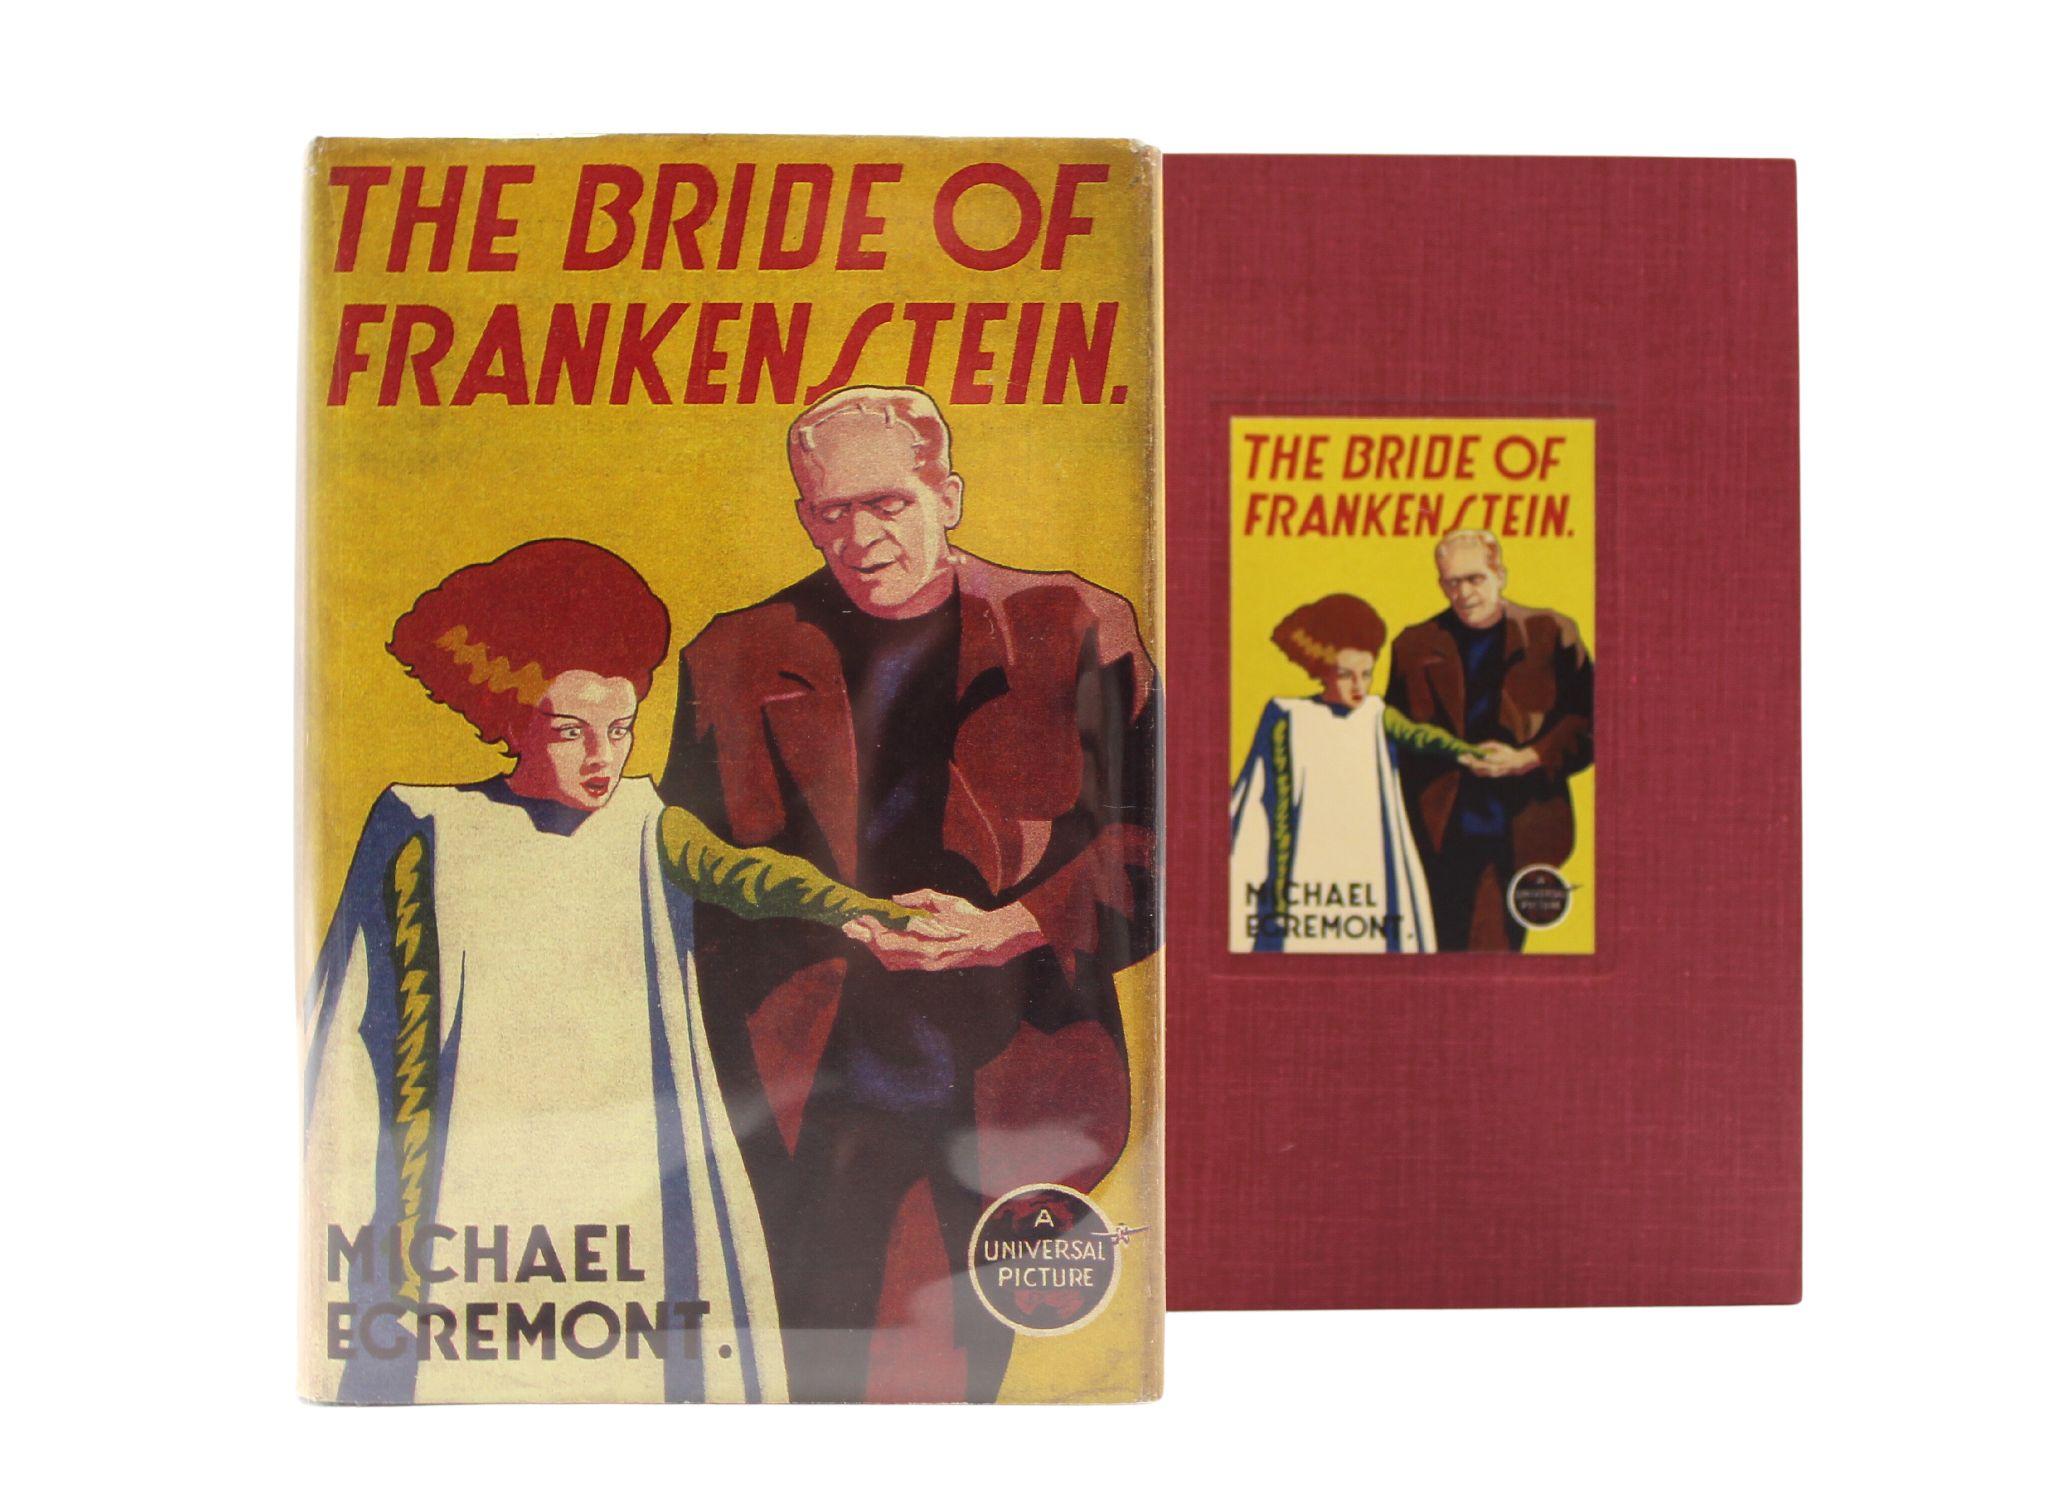 The Bride of Frankenstein by Michael Egremont, Photoplay Edition, 1936 2